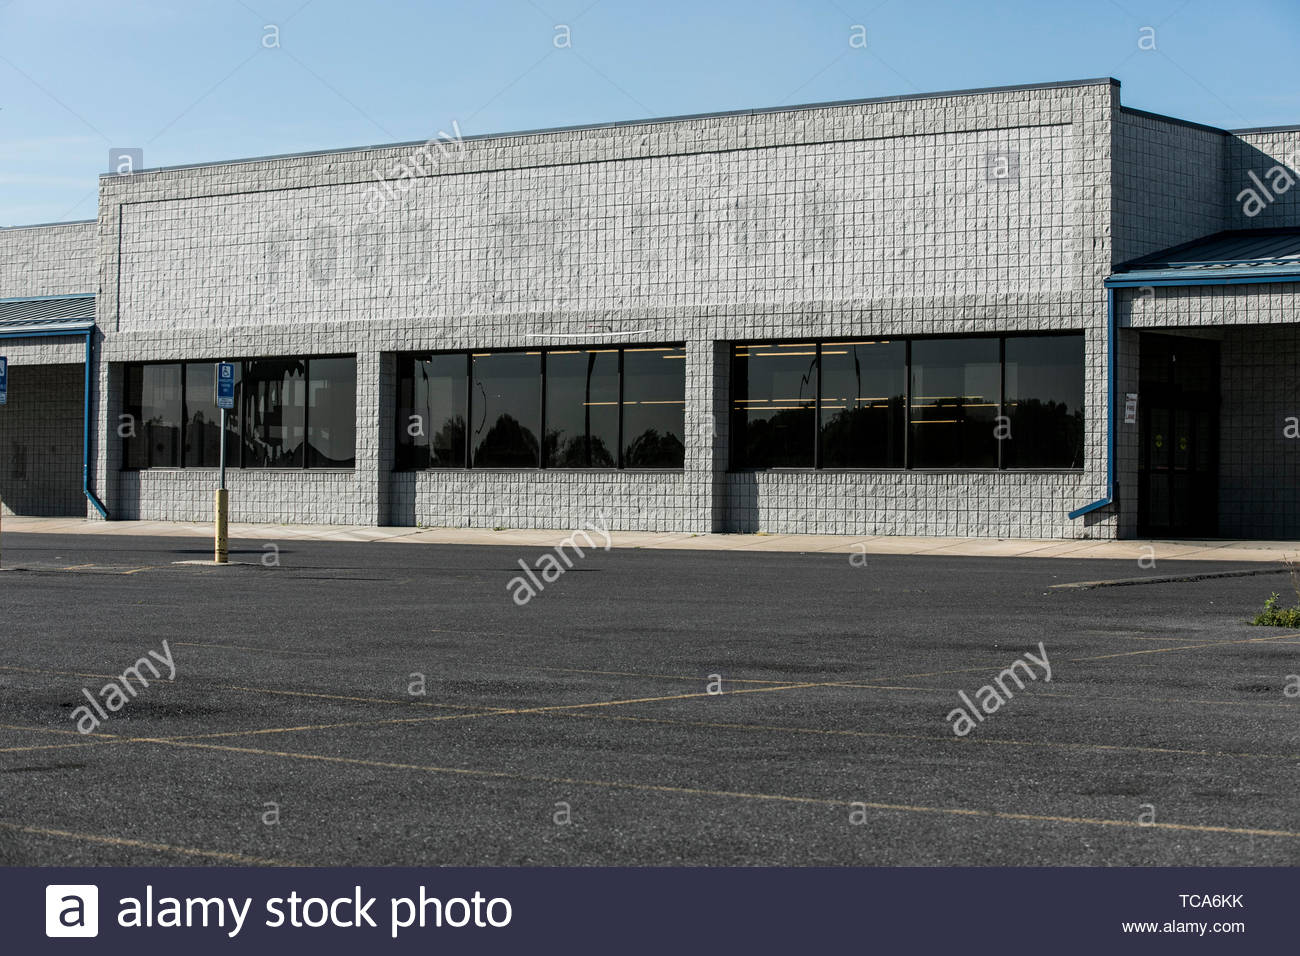 High Quality Abandoned Grocery Store. Blank Meme Template